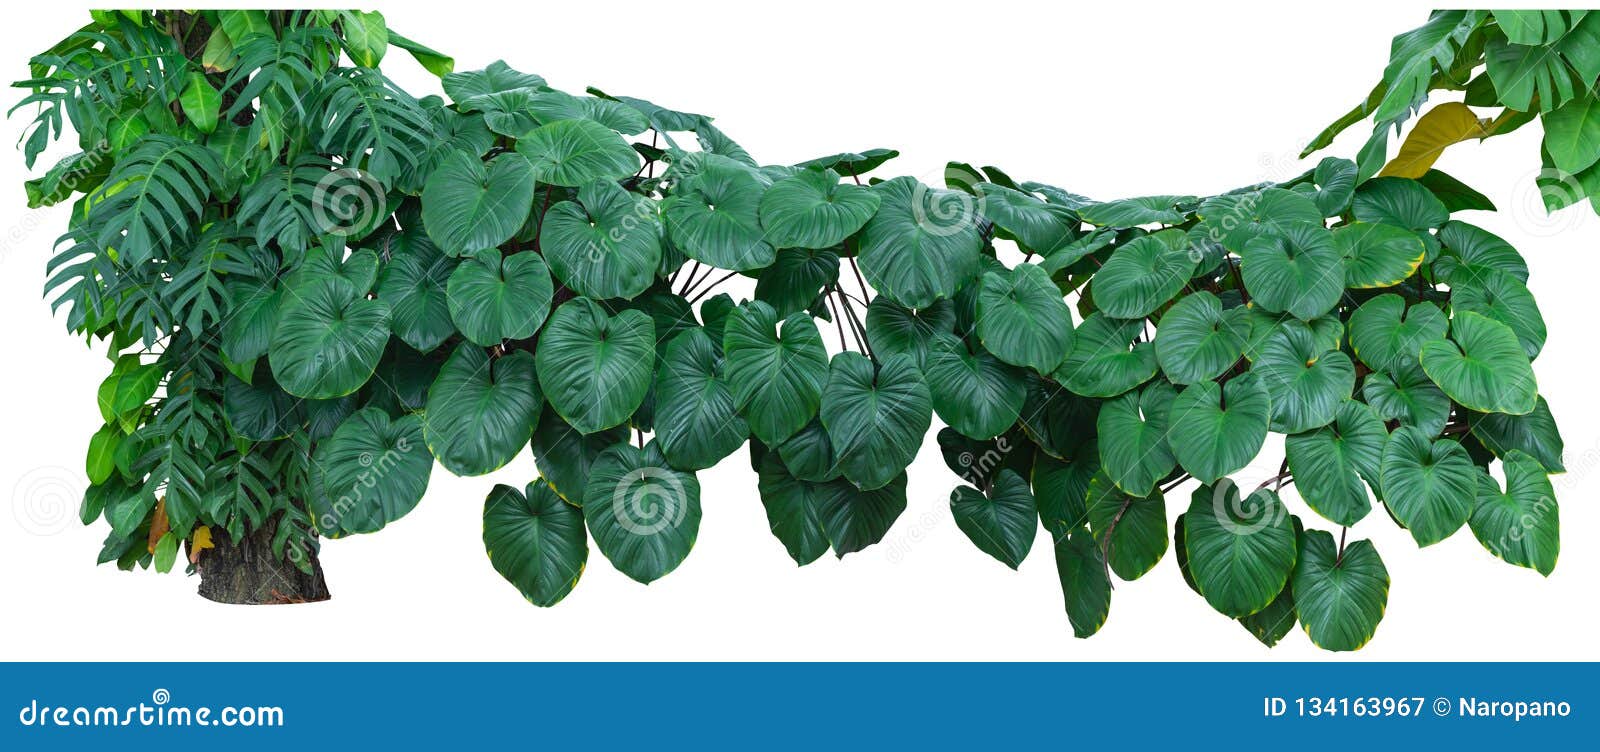 tropical green leaves foliage, jungle plant bushes  on white background with clipping path included